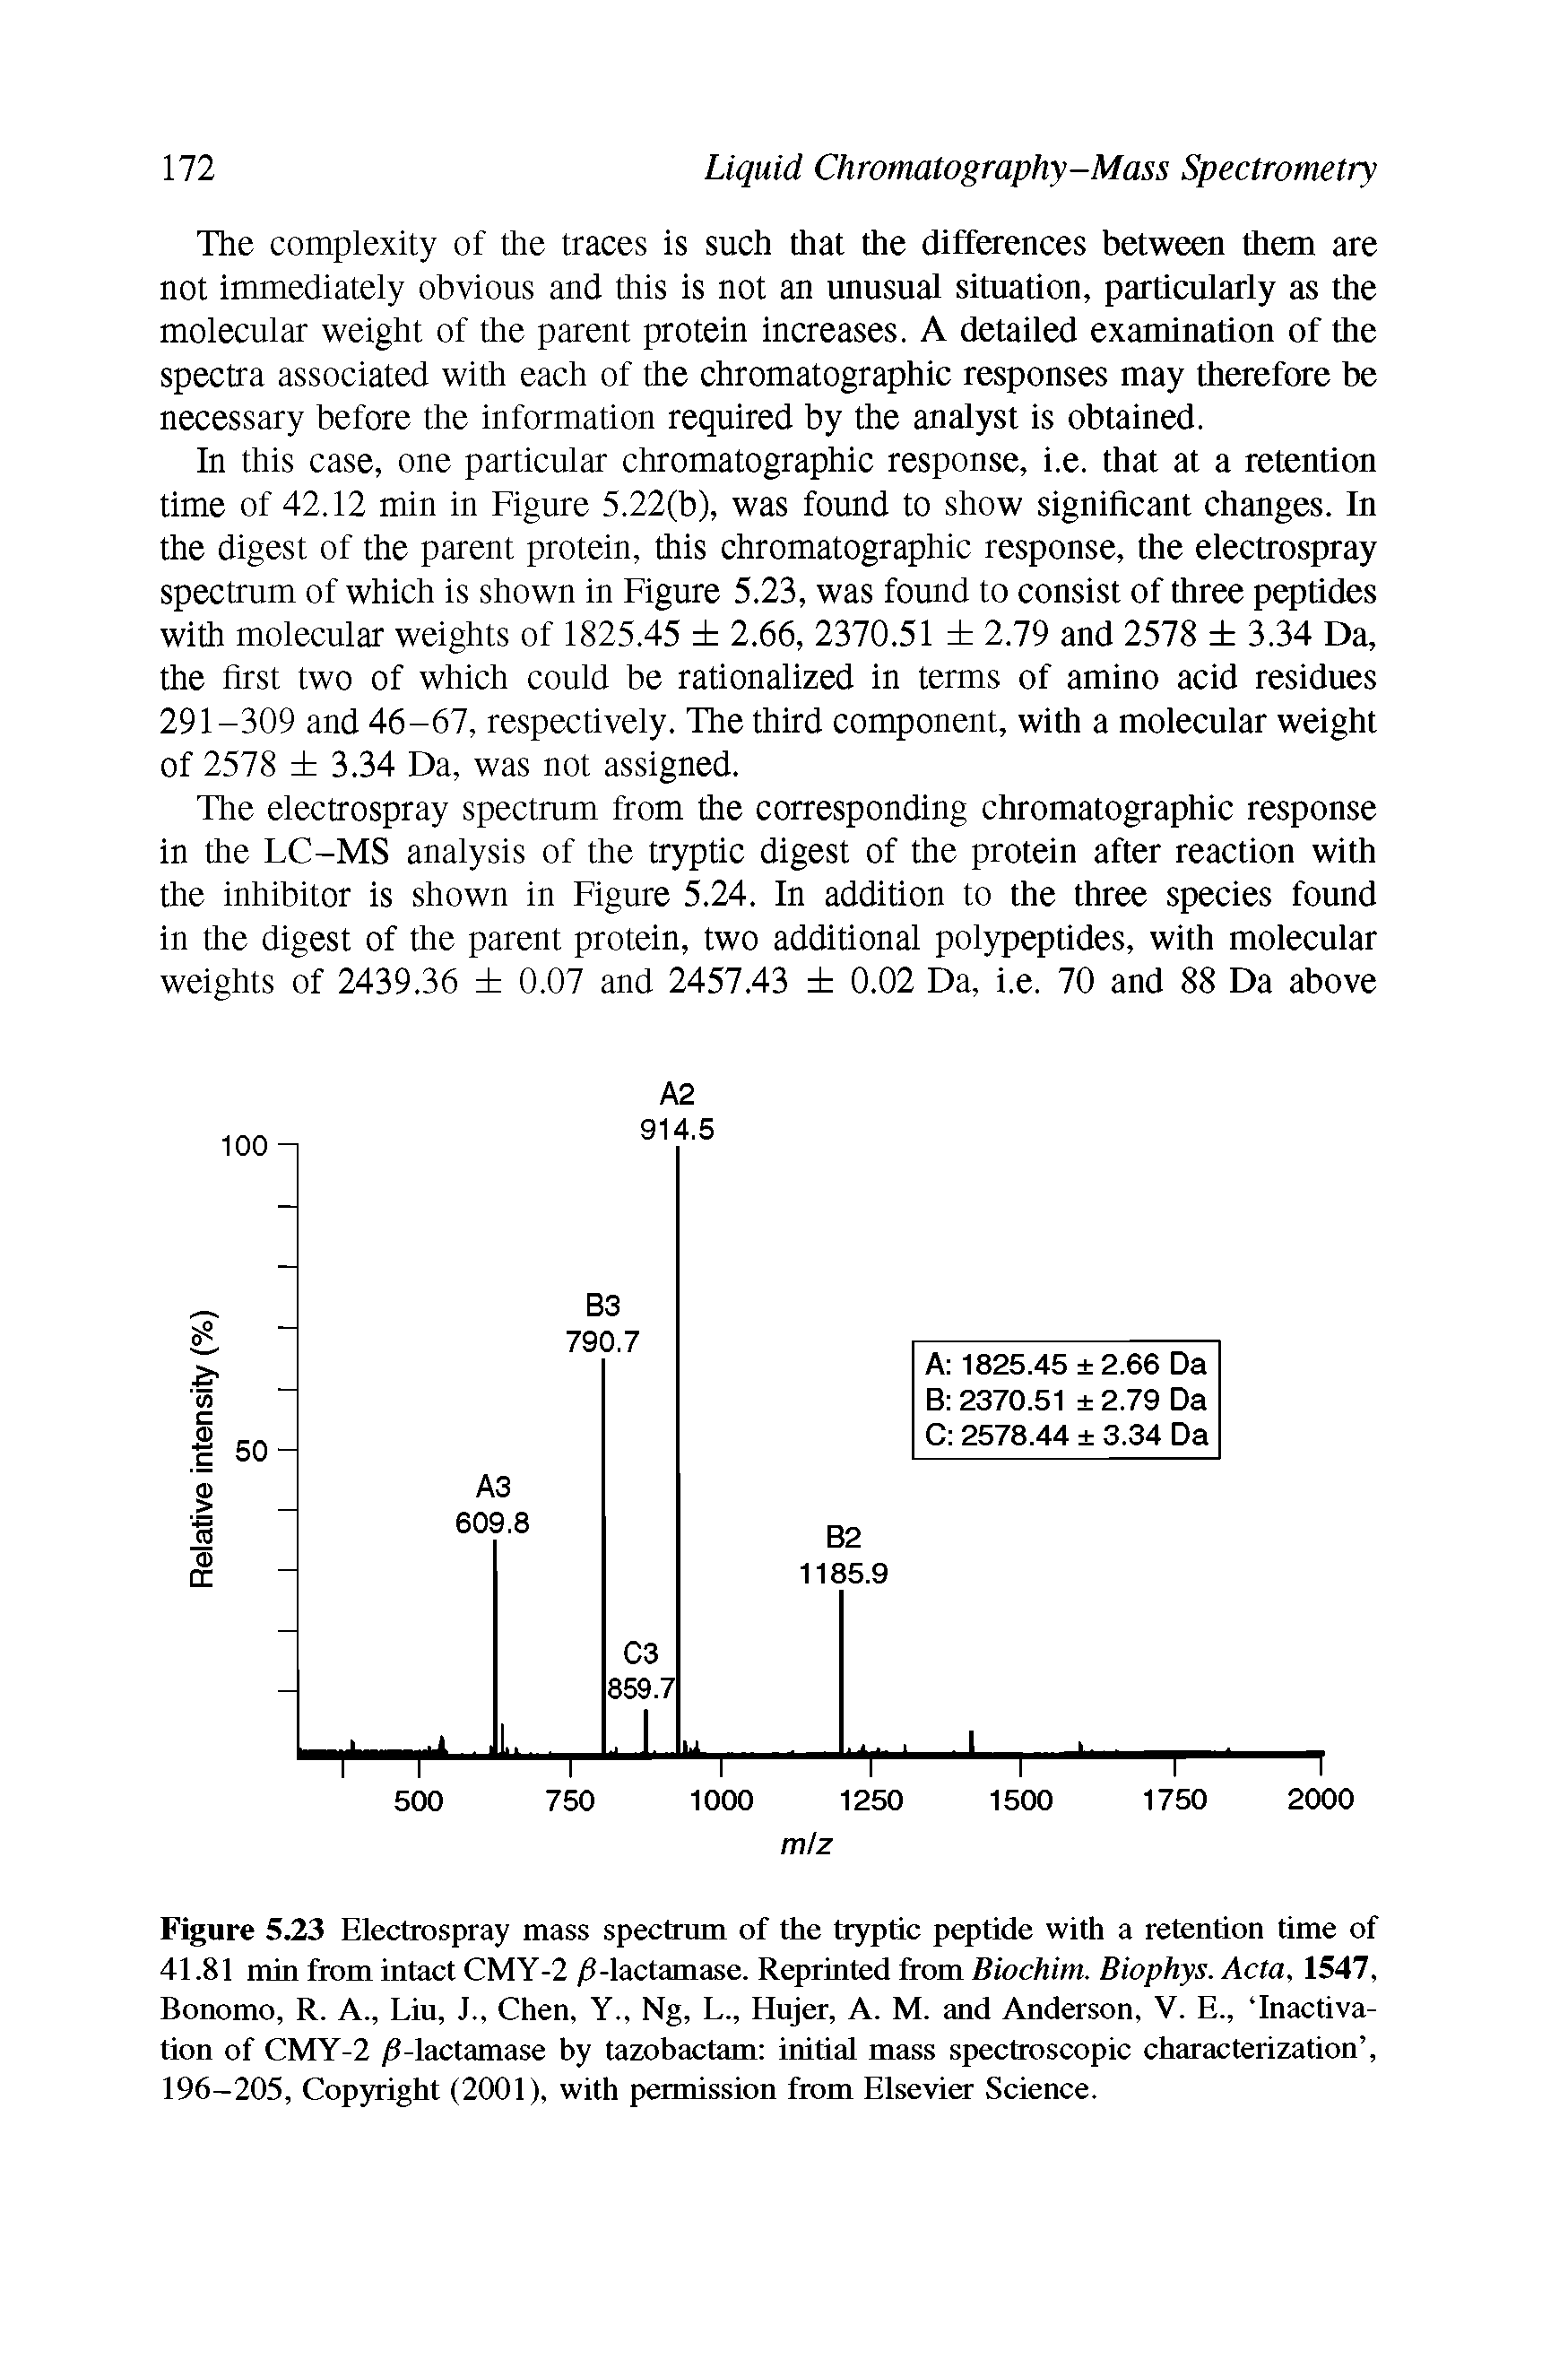 Figure 5.23 Electrospray mass spectrum of the tryptic peptide with a retention time of 41.81 min from intact CMY-2 -lactamase. Reprinted from Biochim. Biophys. Acta, 1547, Bonomo, R. A., Liu, J., Chen, Y., Ng, L., Hujer, A. M. and Anderson, V. E., Inactivation of CMY-2 0-lactamase by tazobactam initial mass spectroscopic characterization , 196-205, Copyright (2001), with permission from Elsevier Science.